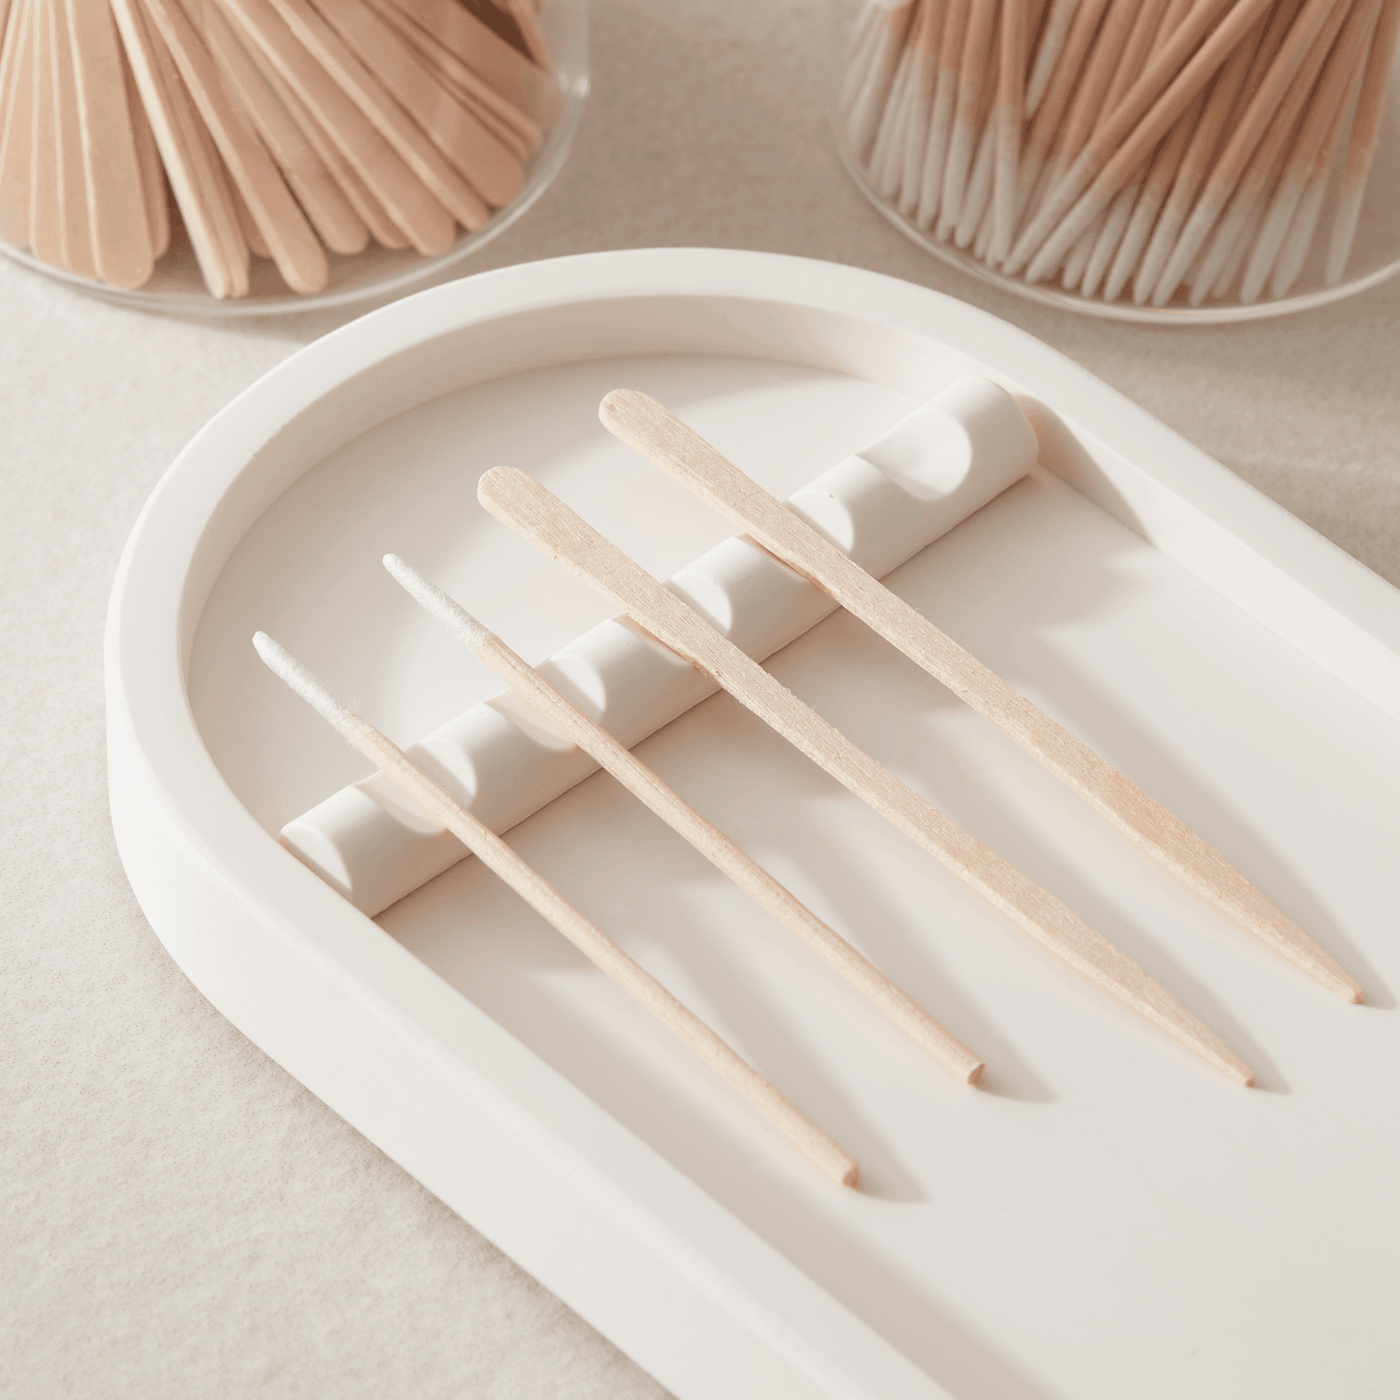 Small Waxing Spatulas - Essential Tool for Precision Waxing | Pack of 100 - The London Brow Company